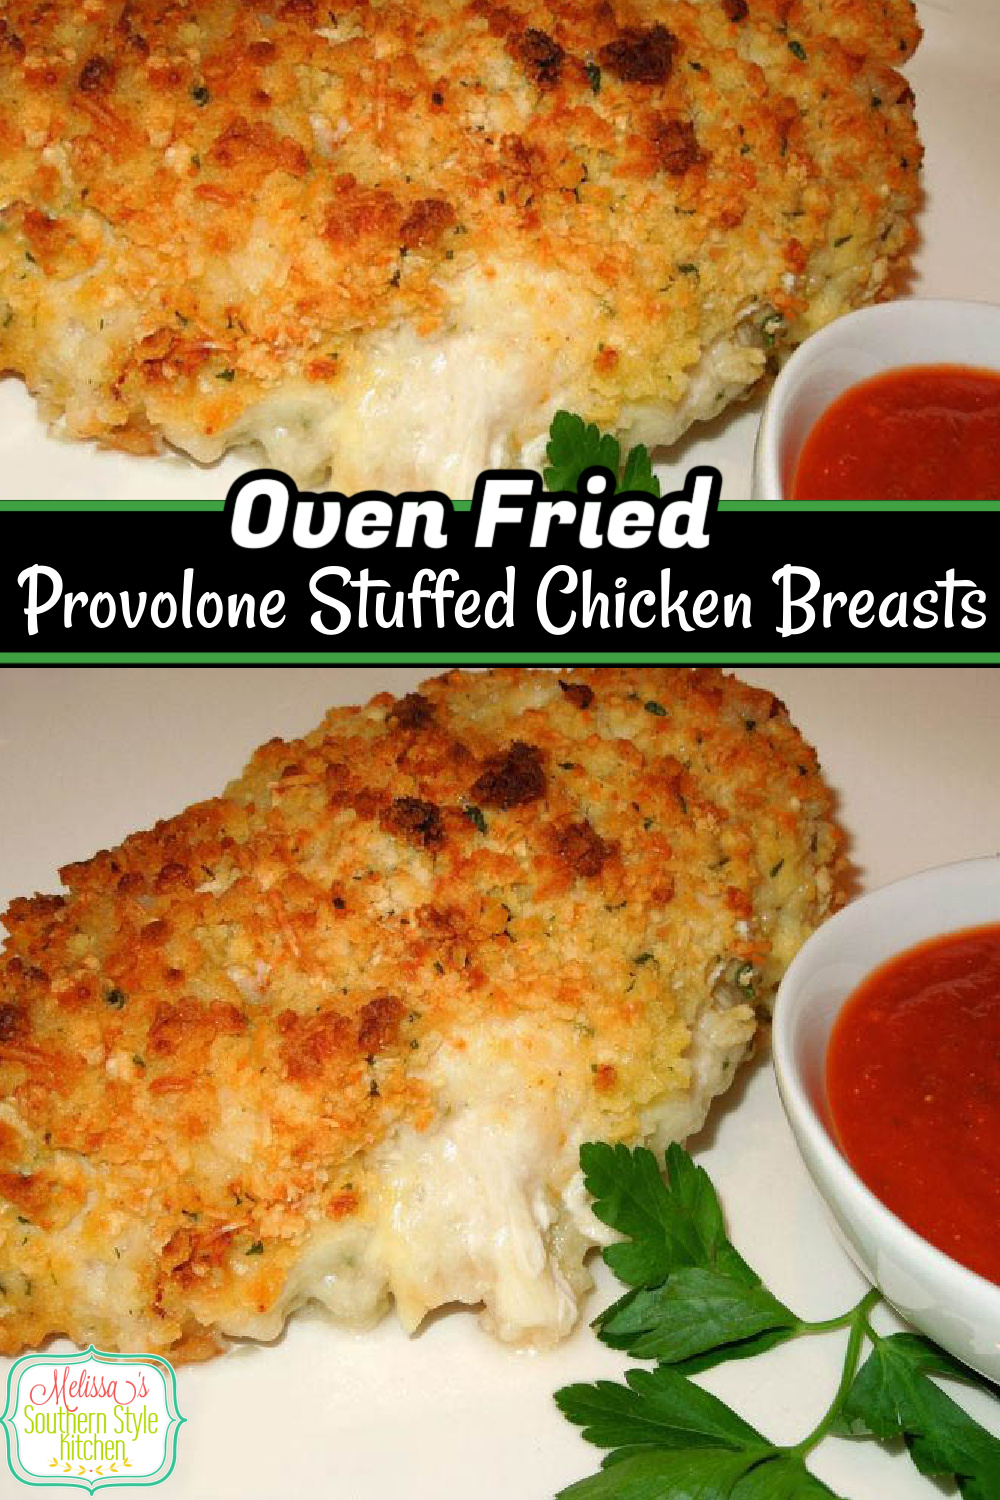 Serve these crispy provolone cheese stuffed chicken breasts with a side of pasta and marinara sauce #ovenfriedchicken #chickenbreastrecipes #easychickenrecipes #chickenbreasts #friedchicken #Italian #Italianchicken #dinner #dinnerideas #southernfood #southernrecipes via @melissasssk